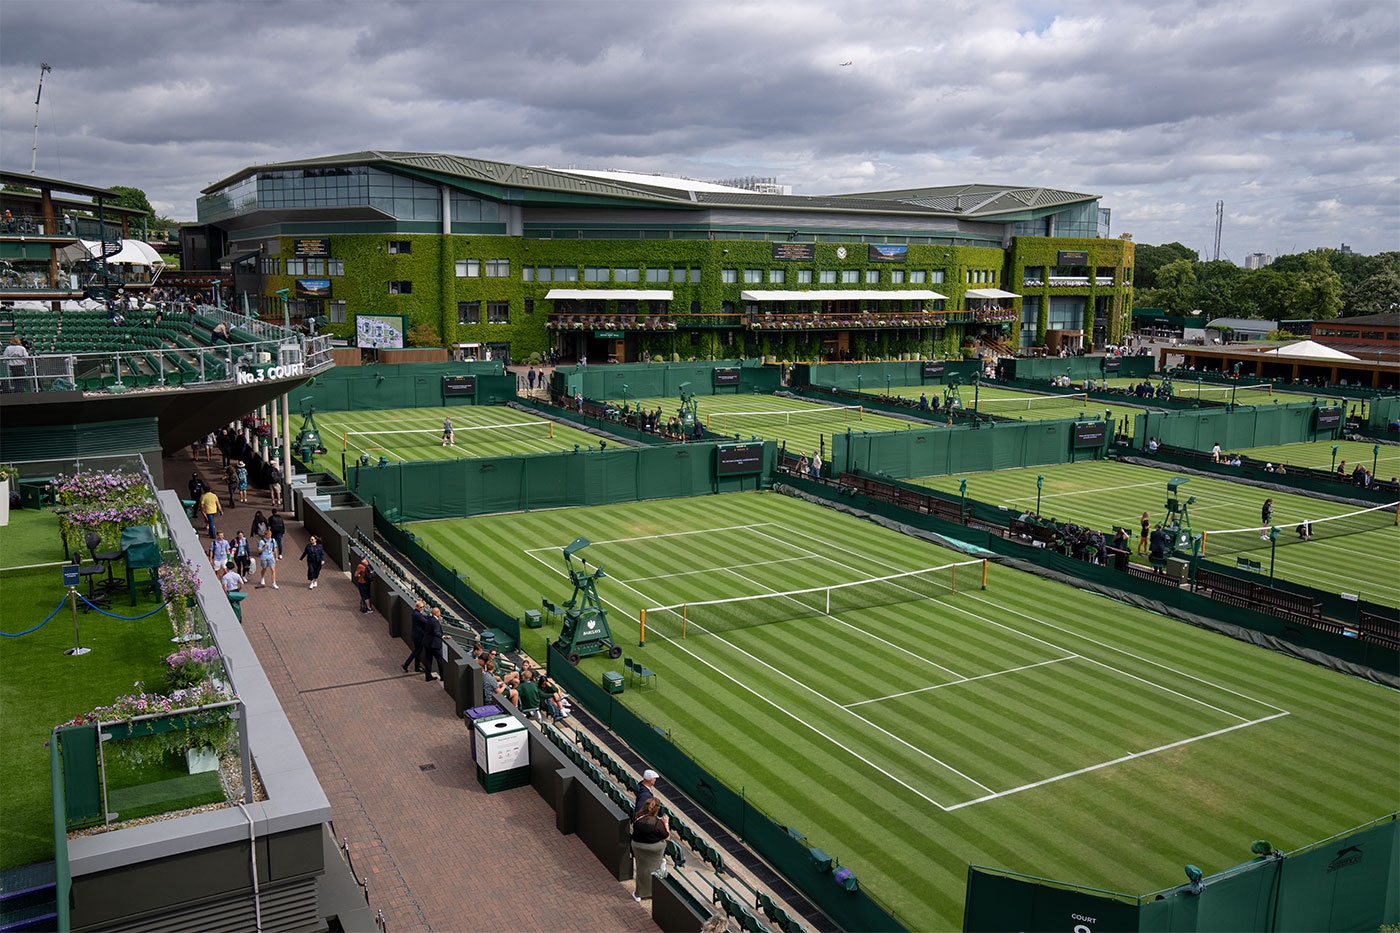 Wimbledon 2023: what's new for 2023: Part 2 - The Championships - The  Championships, Wimbledon - Official Site by IBM